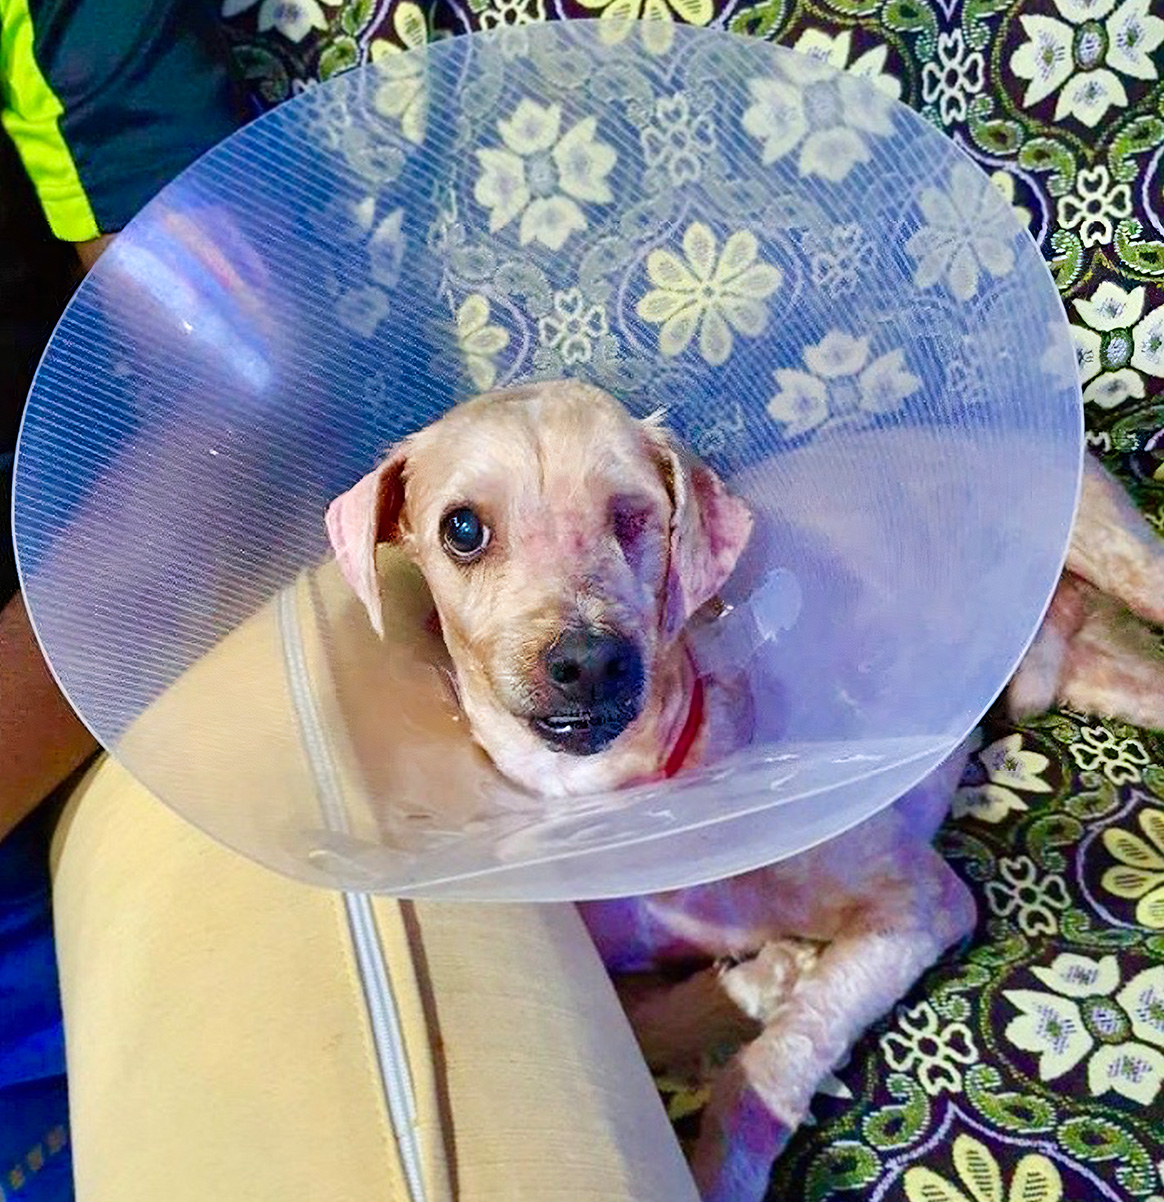 Dog recovering with an Elizabethan collar